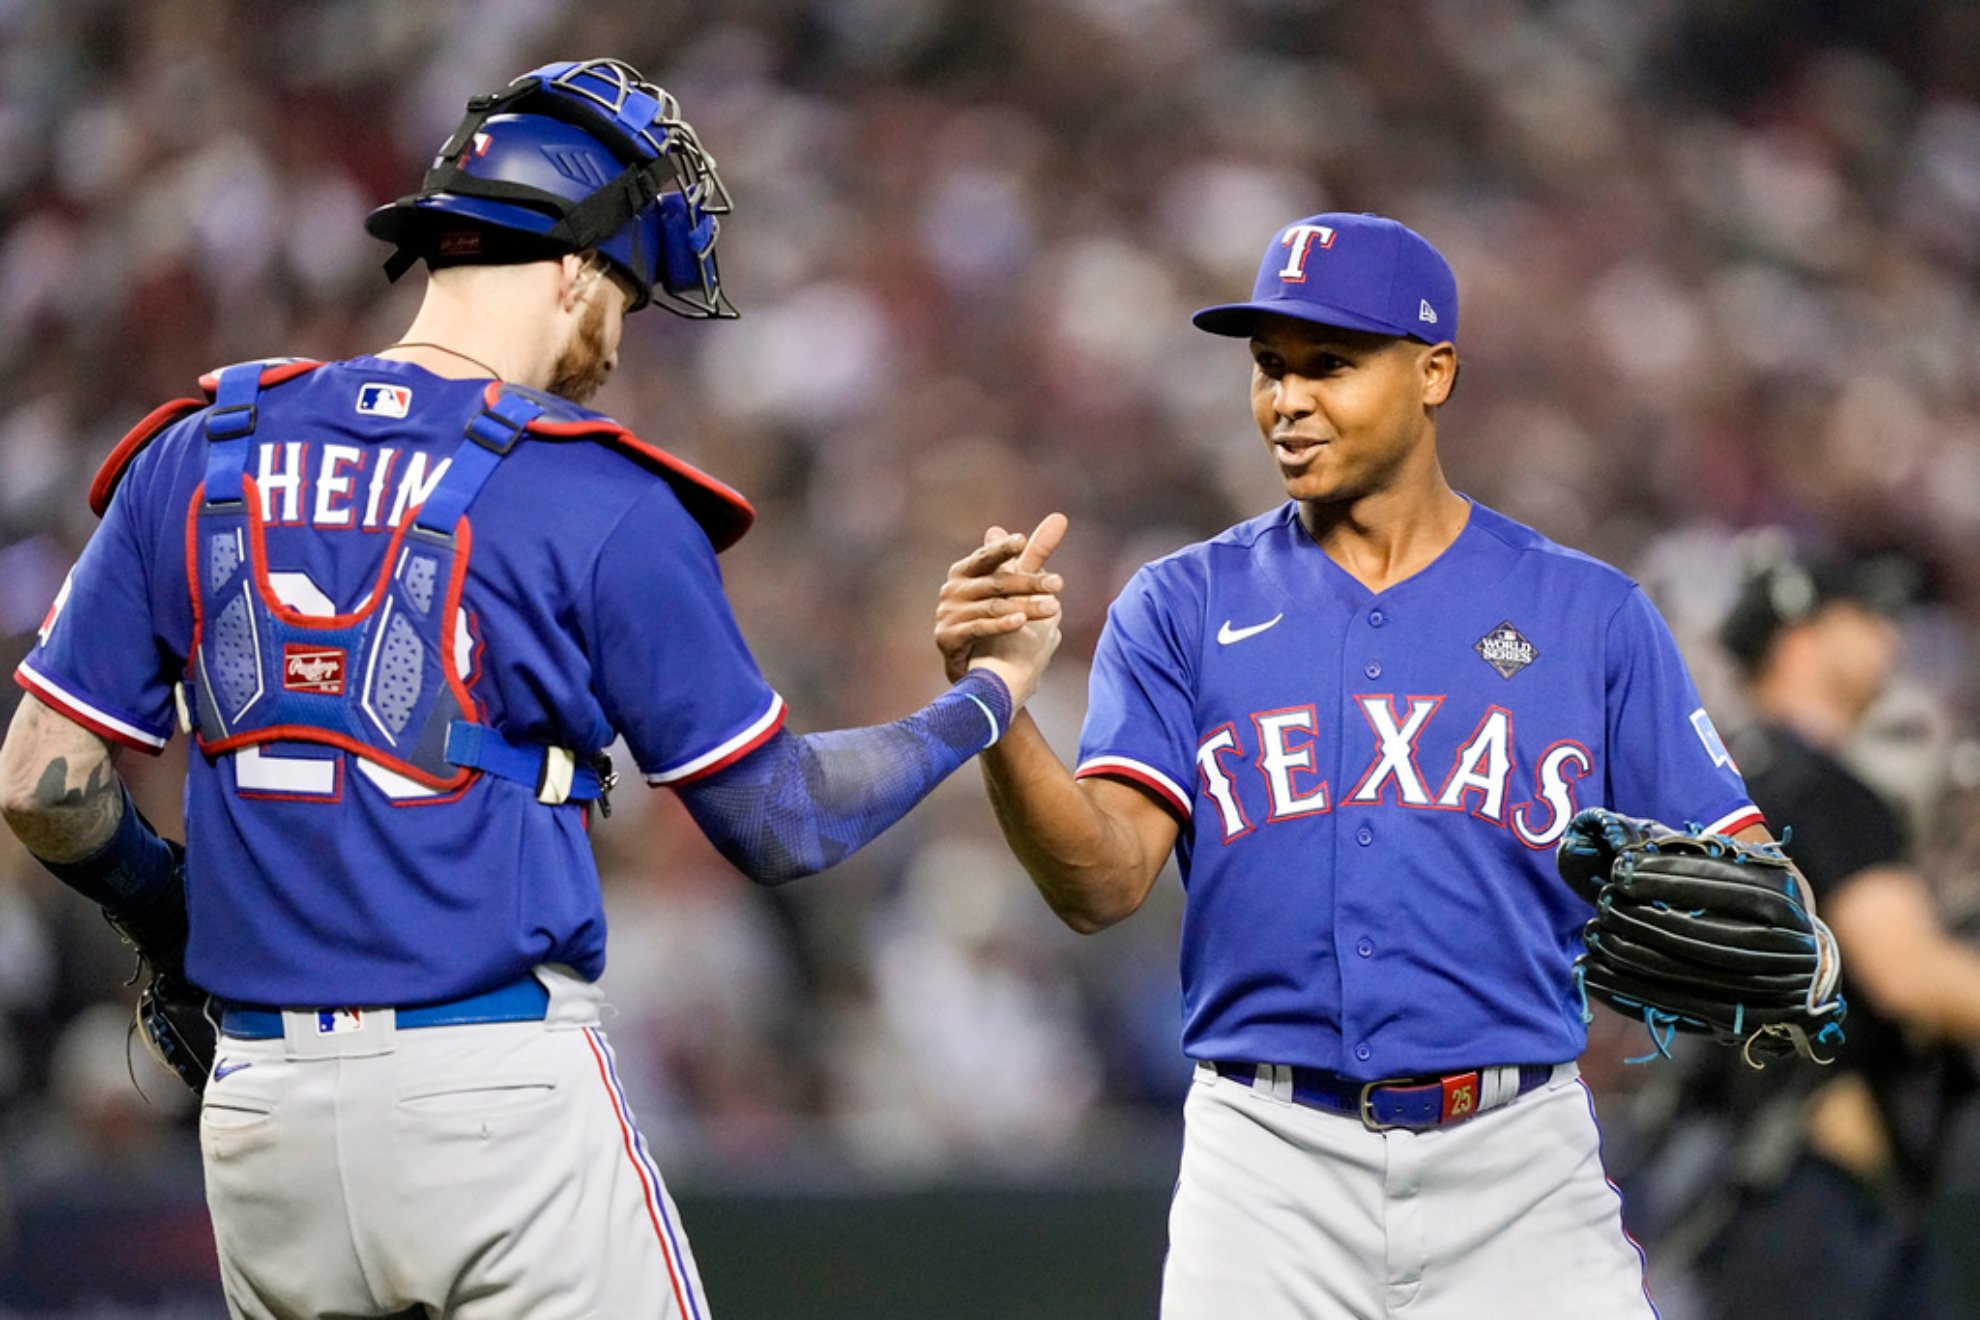 Road warrior Rangers remain perfect away from home, retake World Series lead over D-backs